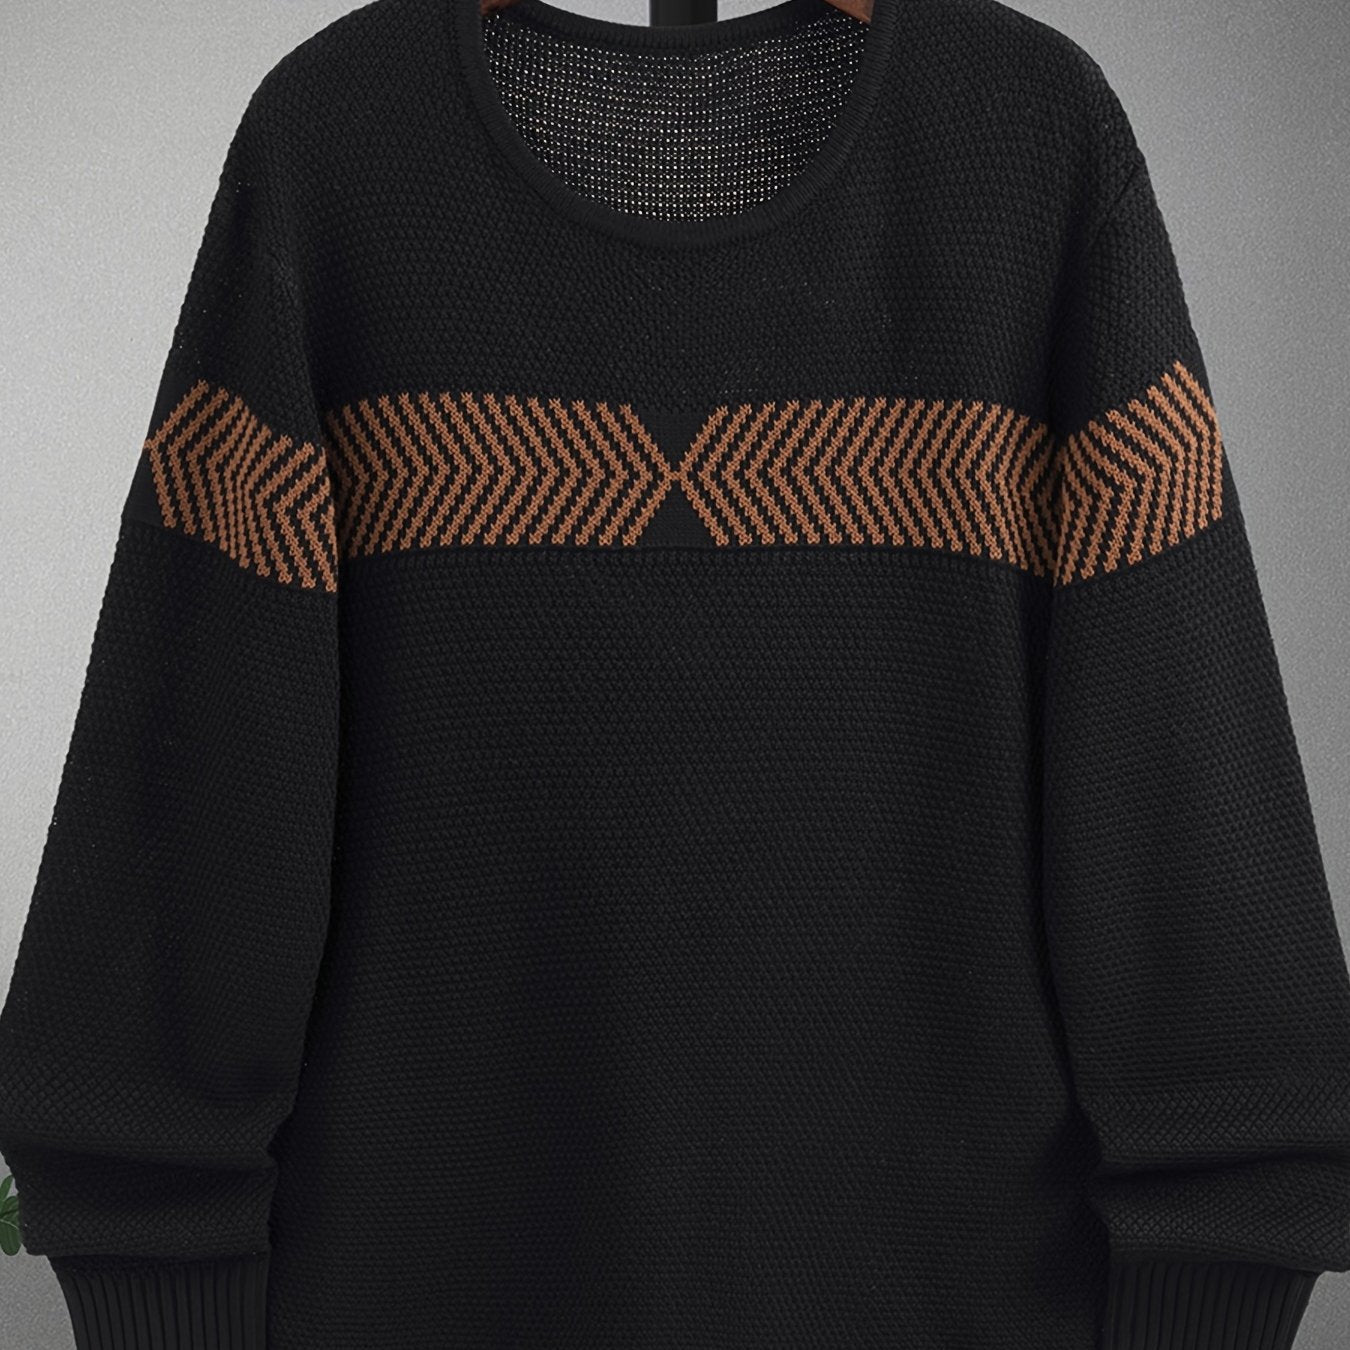 Autumn And Winter Men's Knit Sweater Casual Long Sleeve Black Sweater